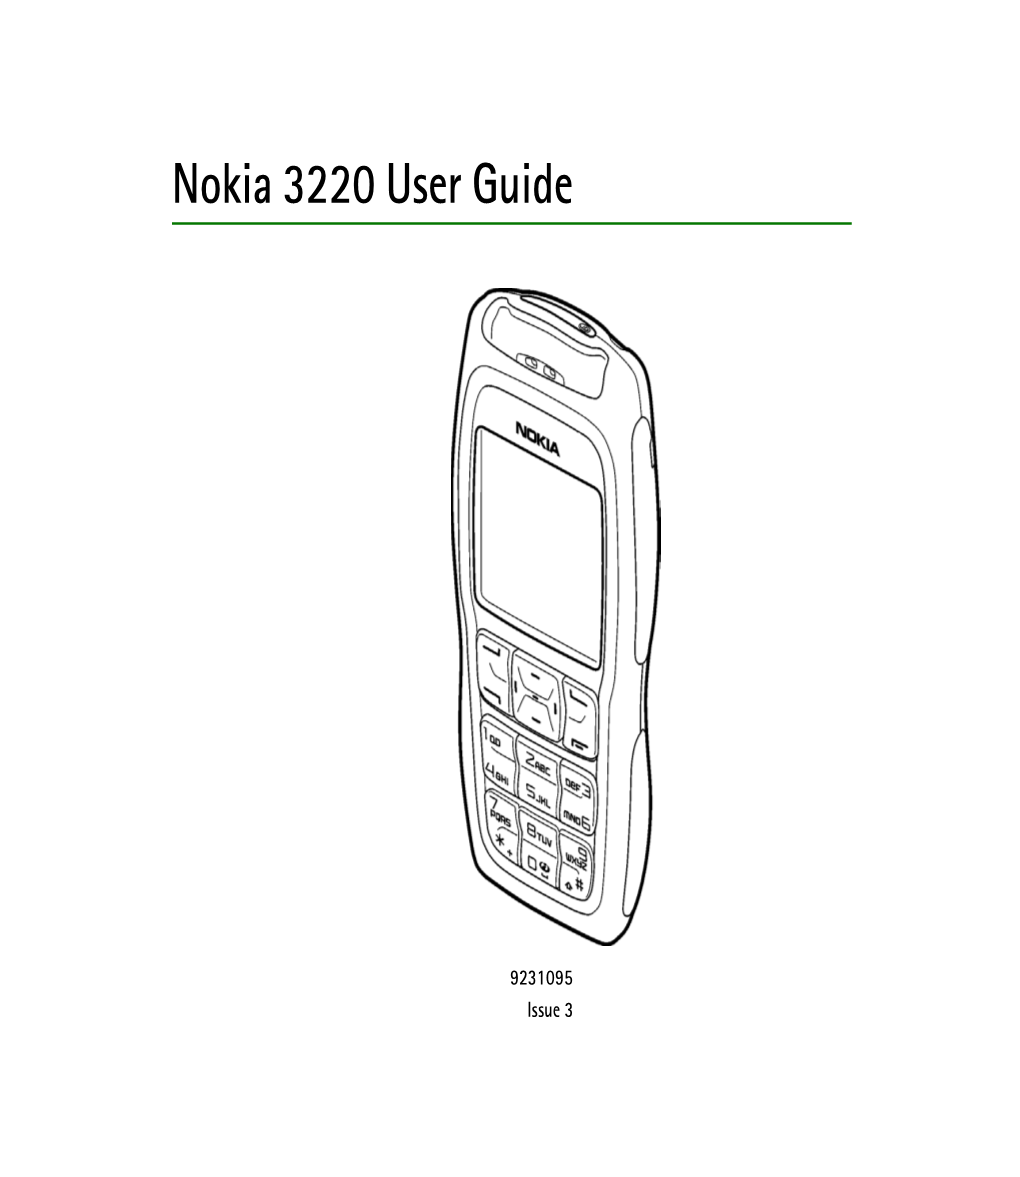 Nokia 3220 User Guide in English